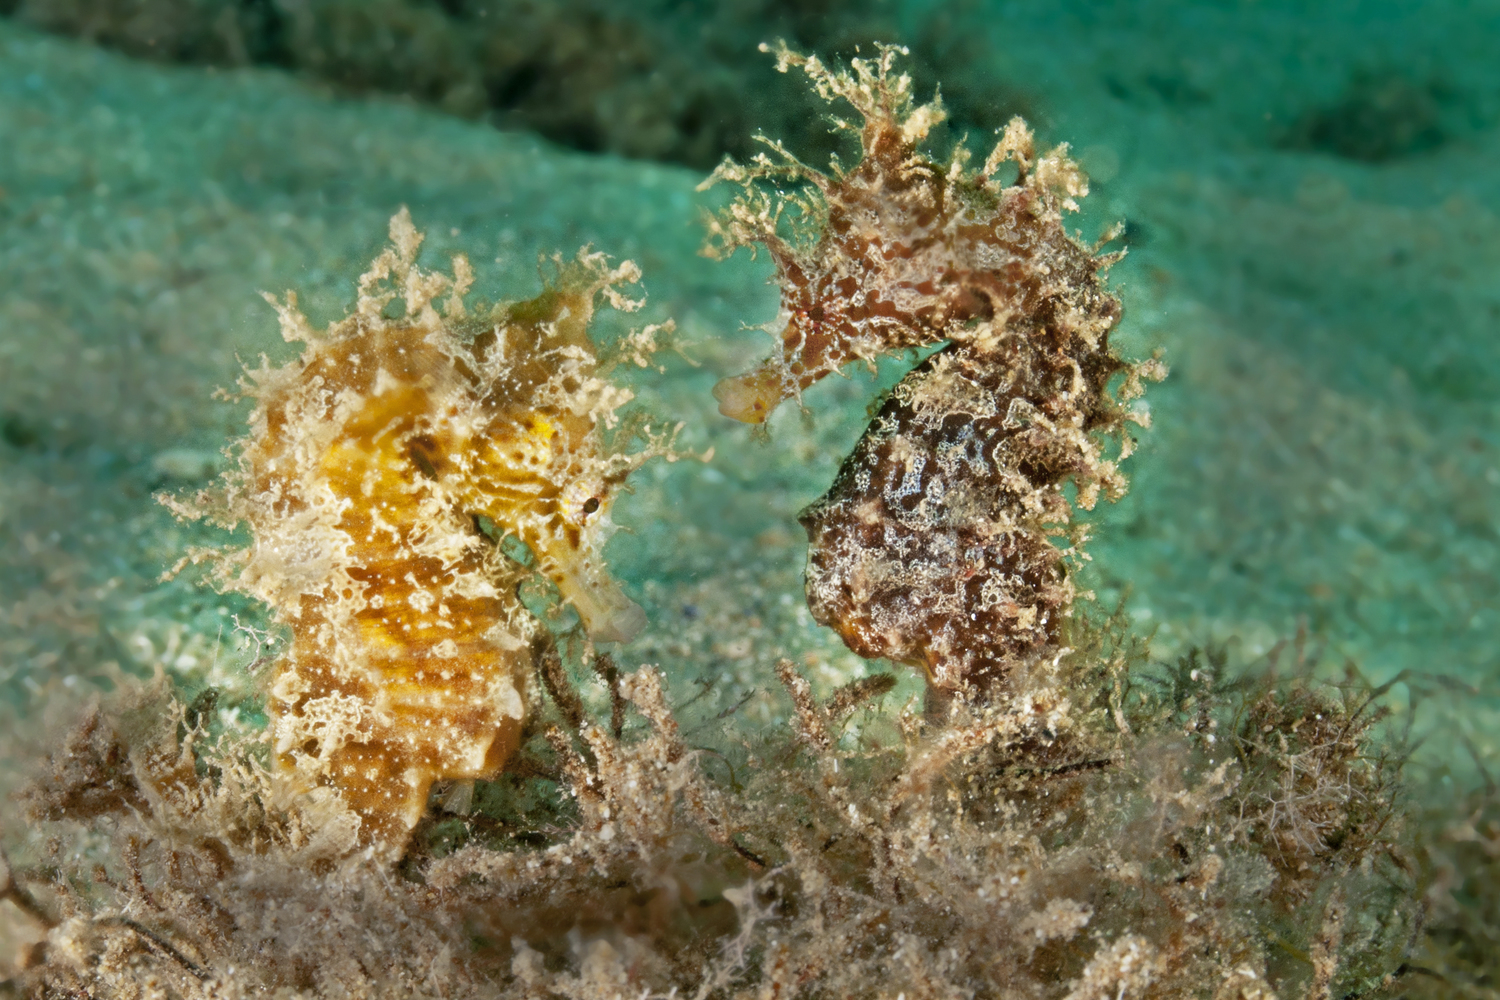 Hippocampus hippocampus (Short-snouted seahorse). Photo by Gino Meskens/Guylian SOTW